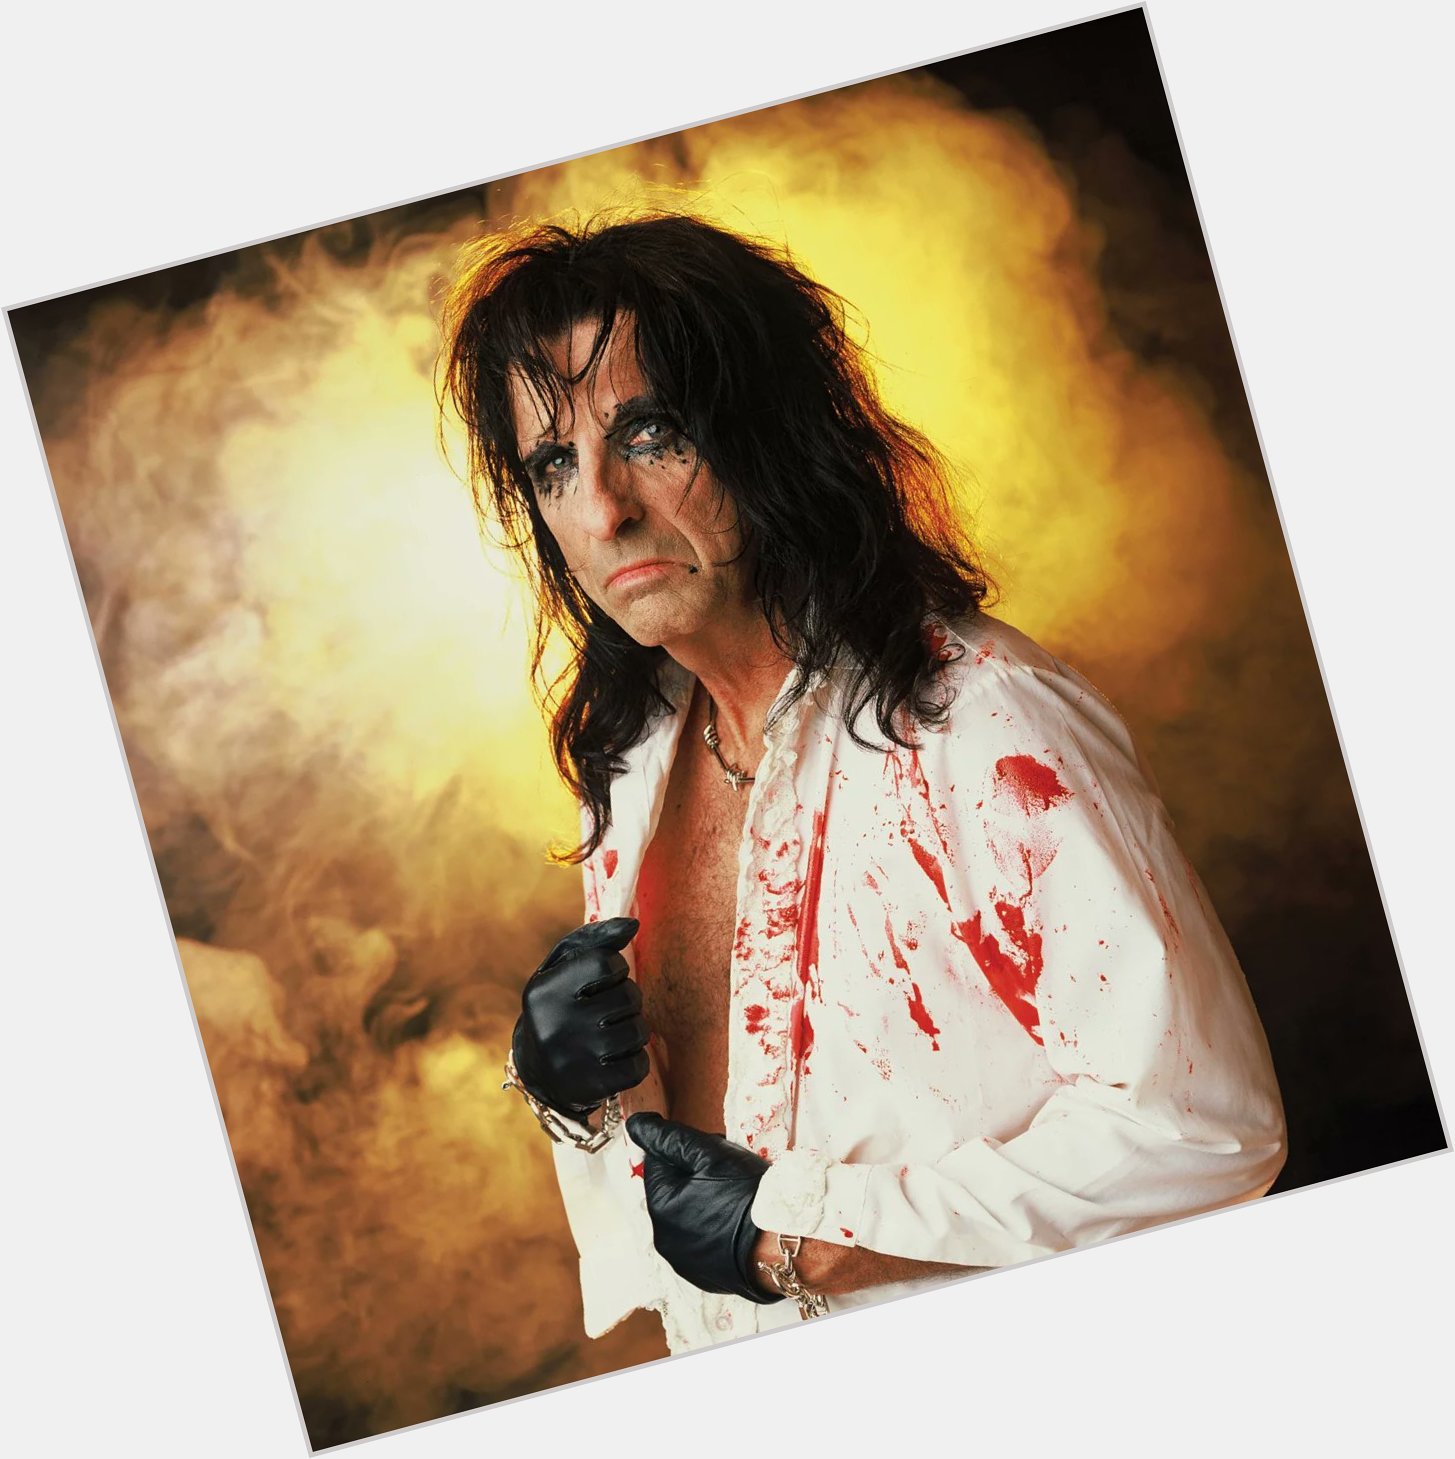 Happy birthday to Alice Cooper who was born on February 4th 1948 